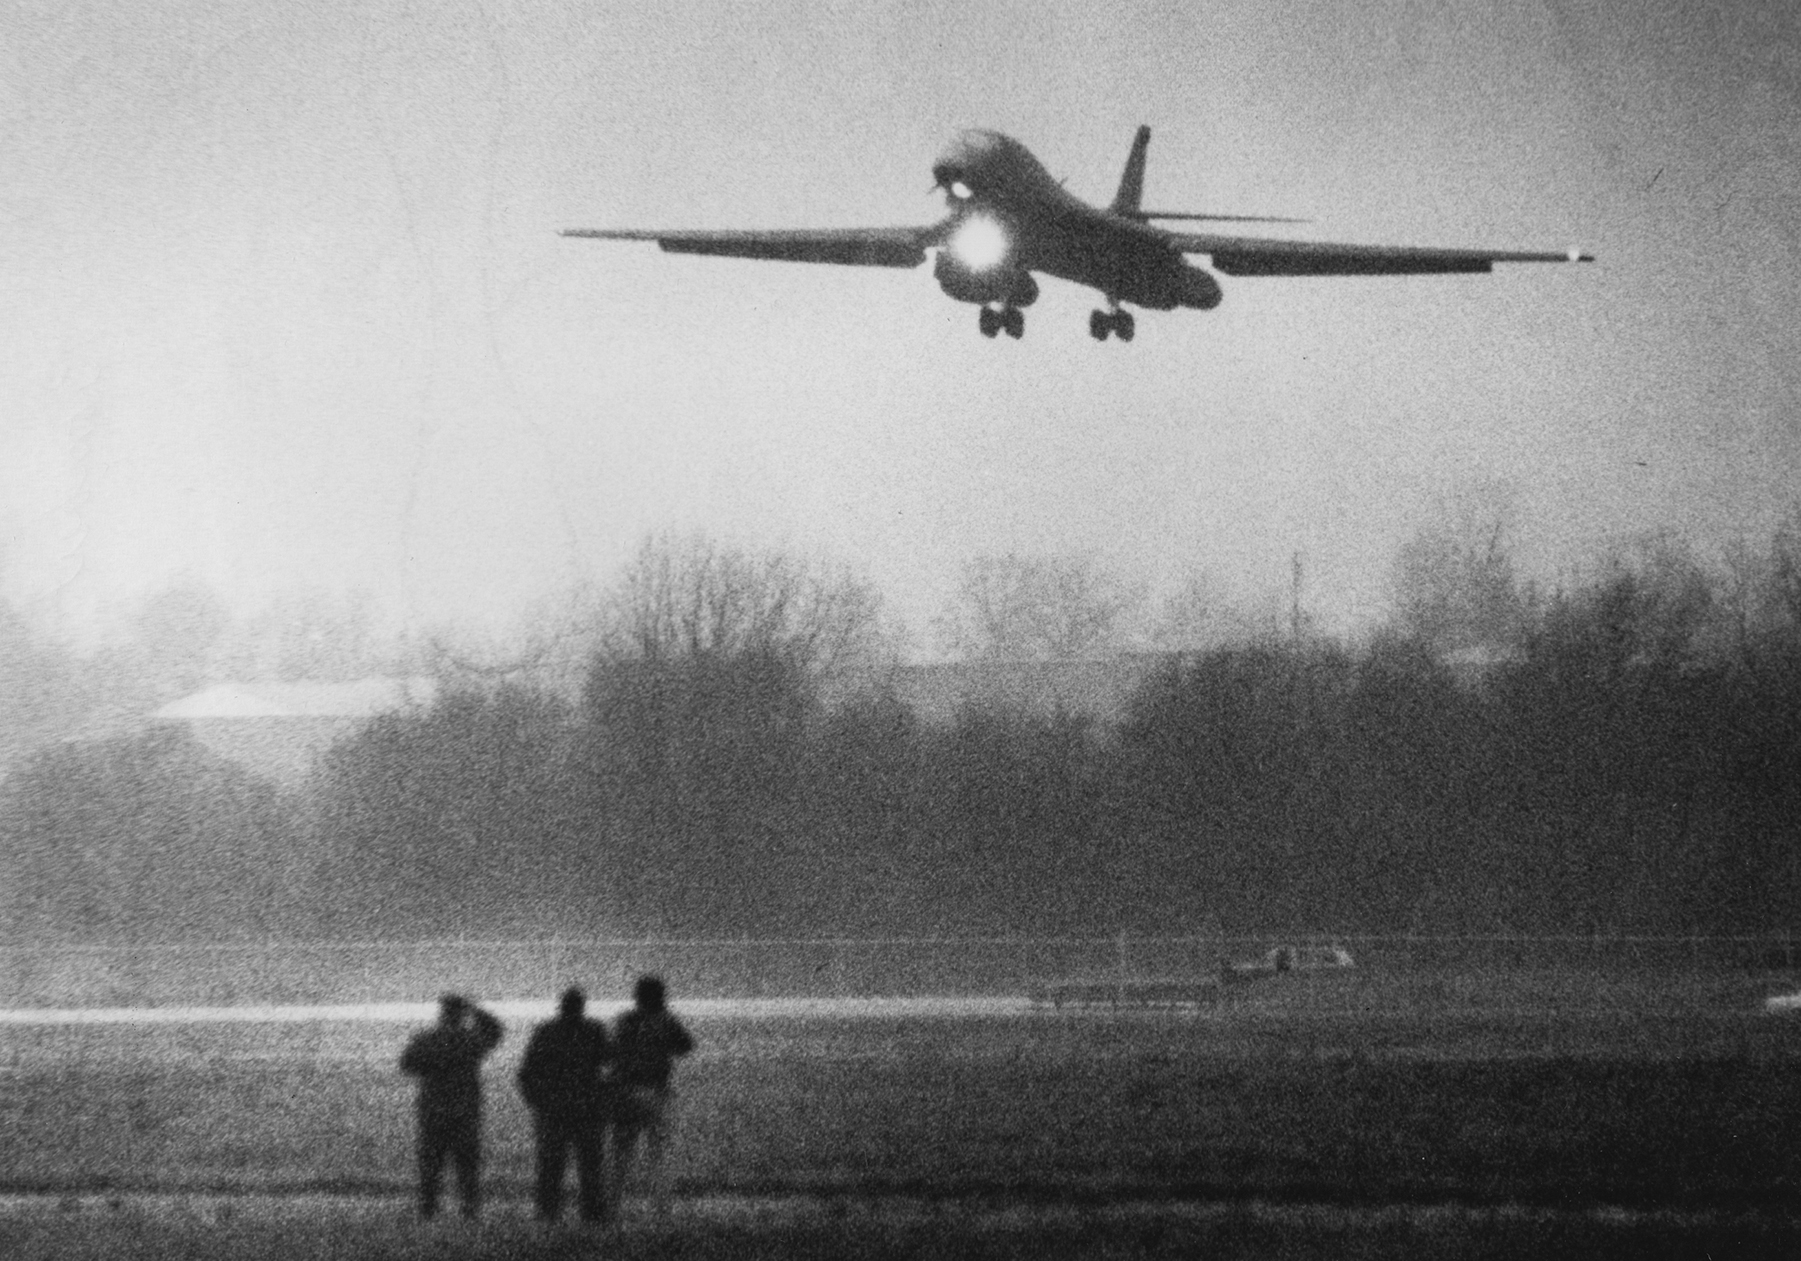 B-1A Bomber arrives in Dayton for the Air Force Museum, Dec. 16, 1986